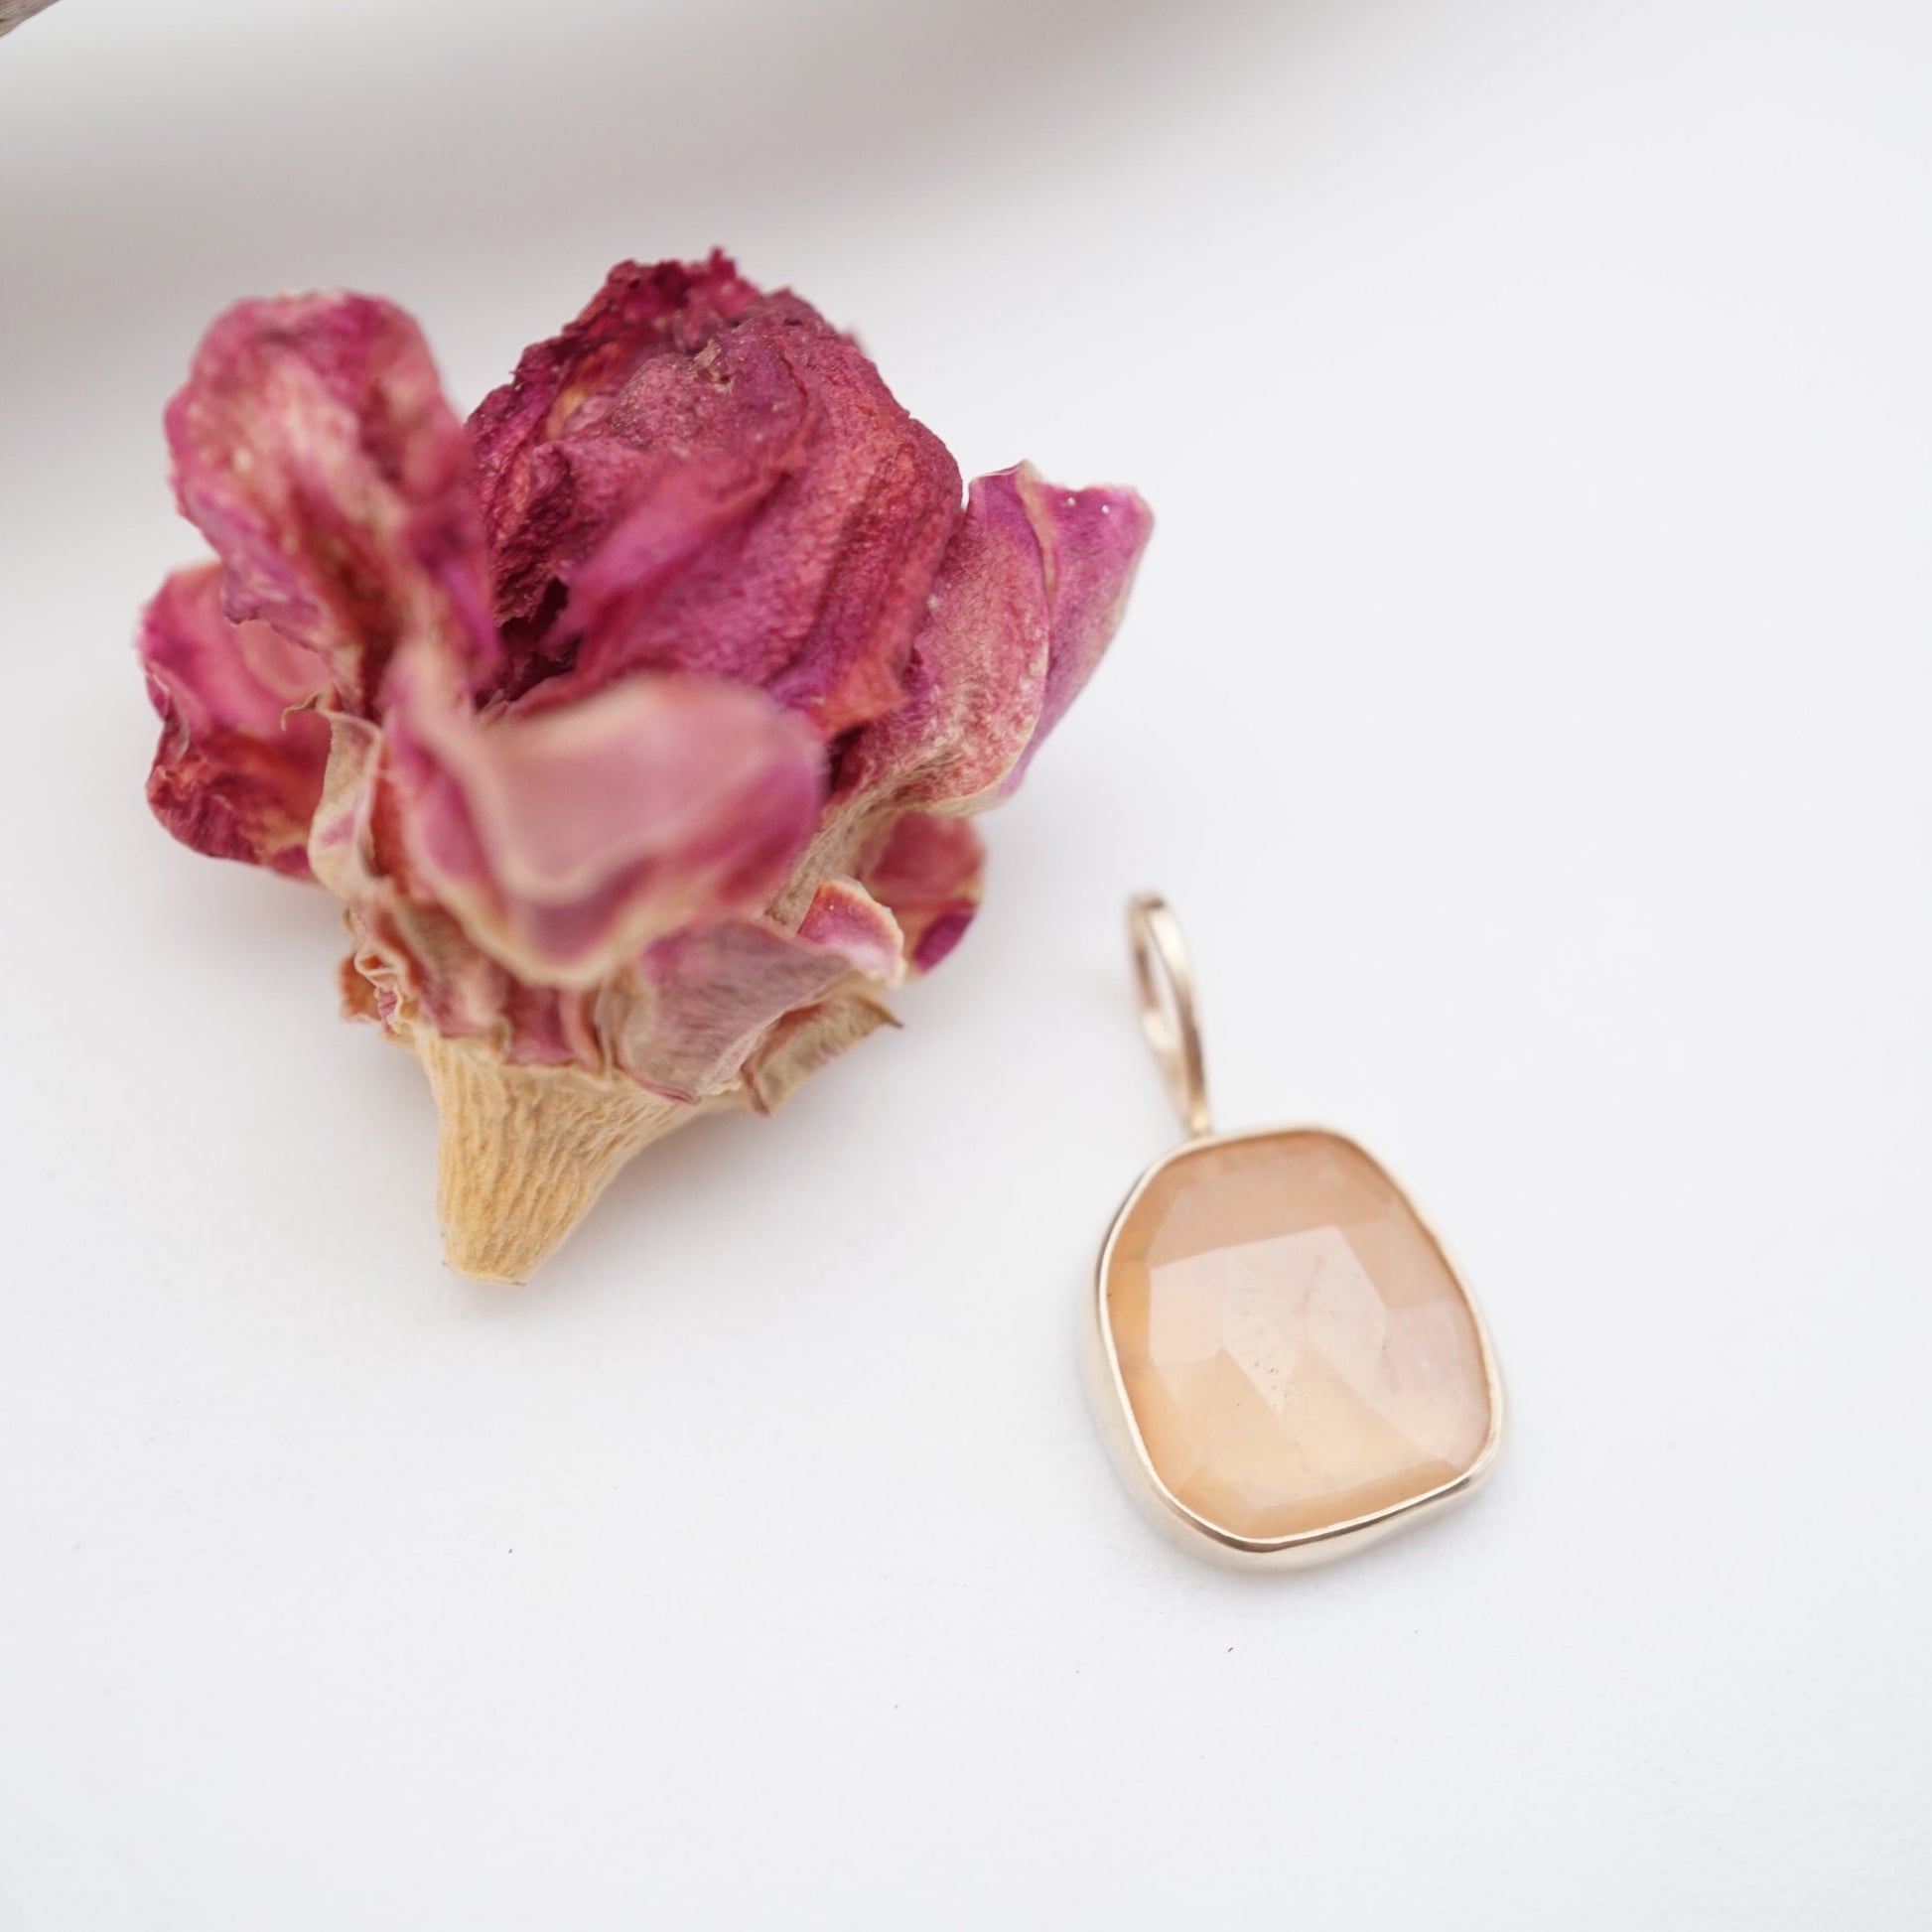 peach moonstone pendant in 14k gold + silver - NO CHAIN INCLUDED - Lumenrose